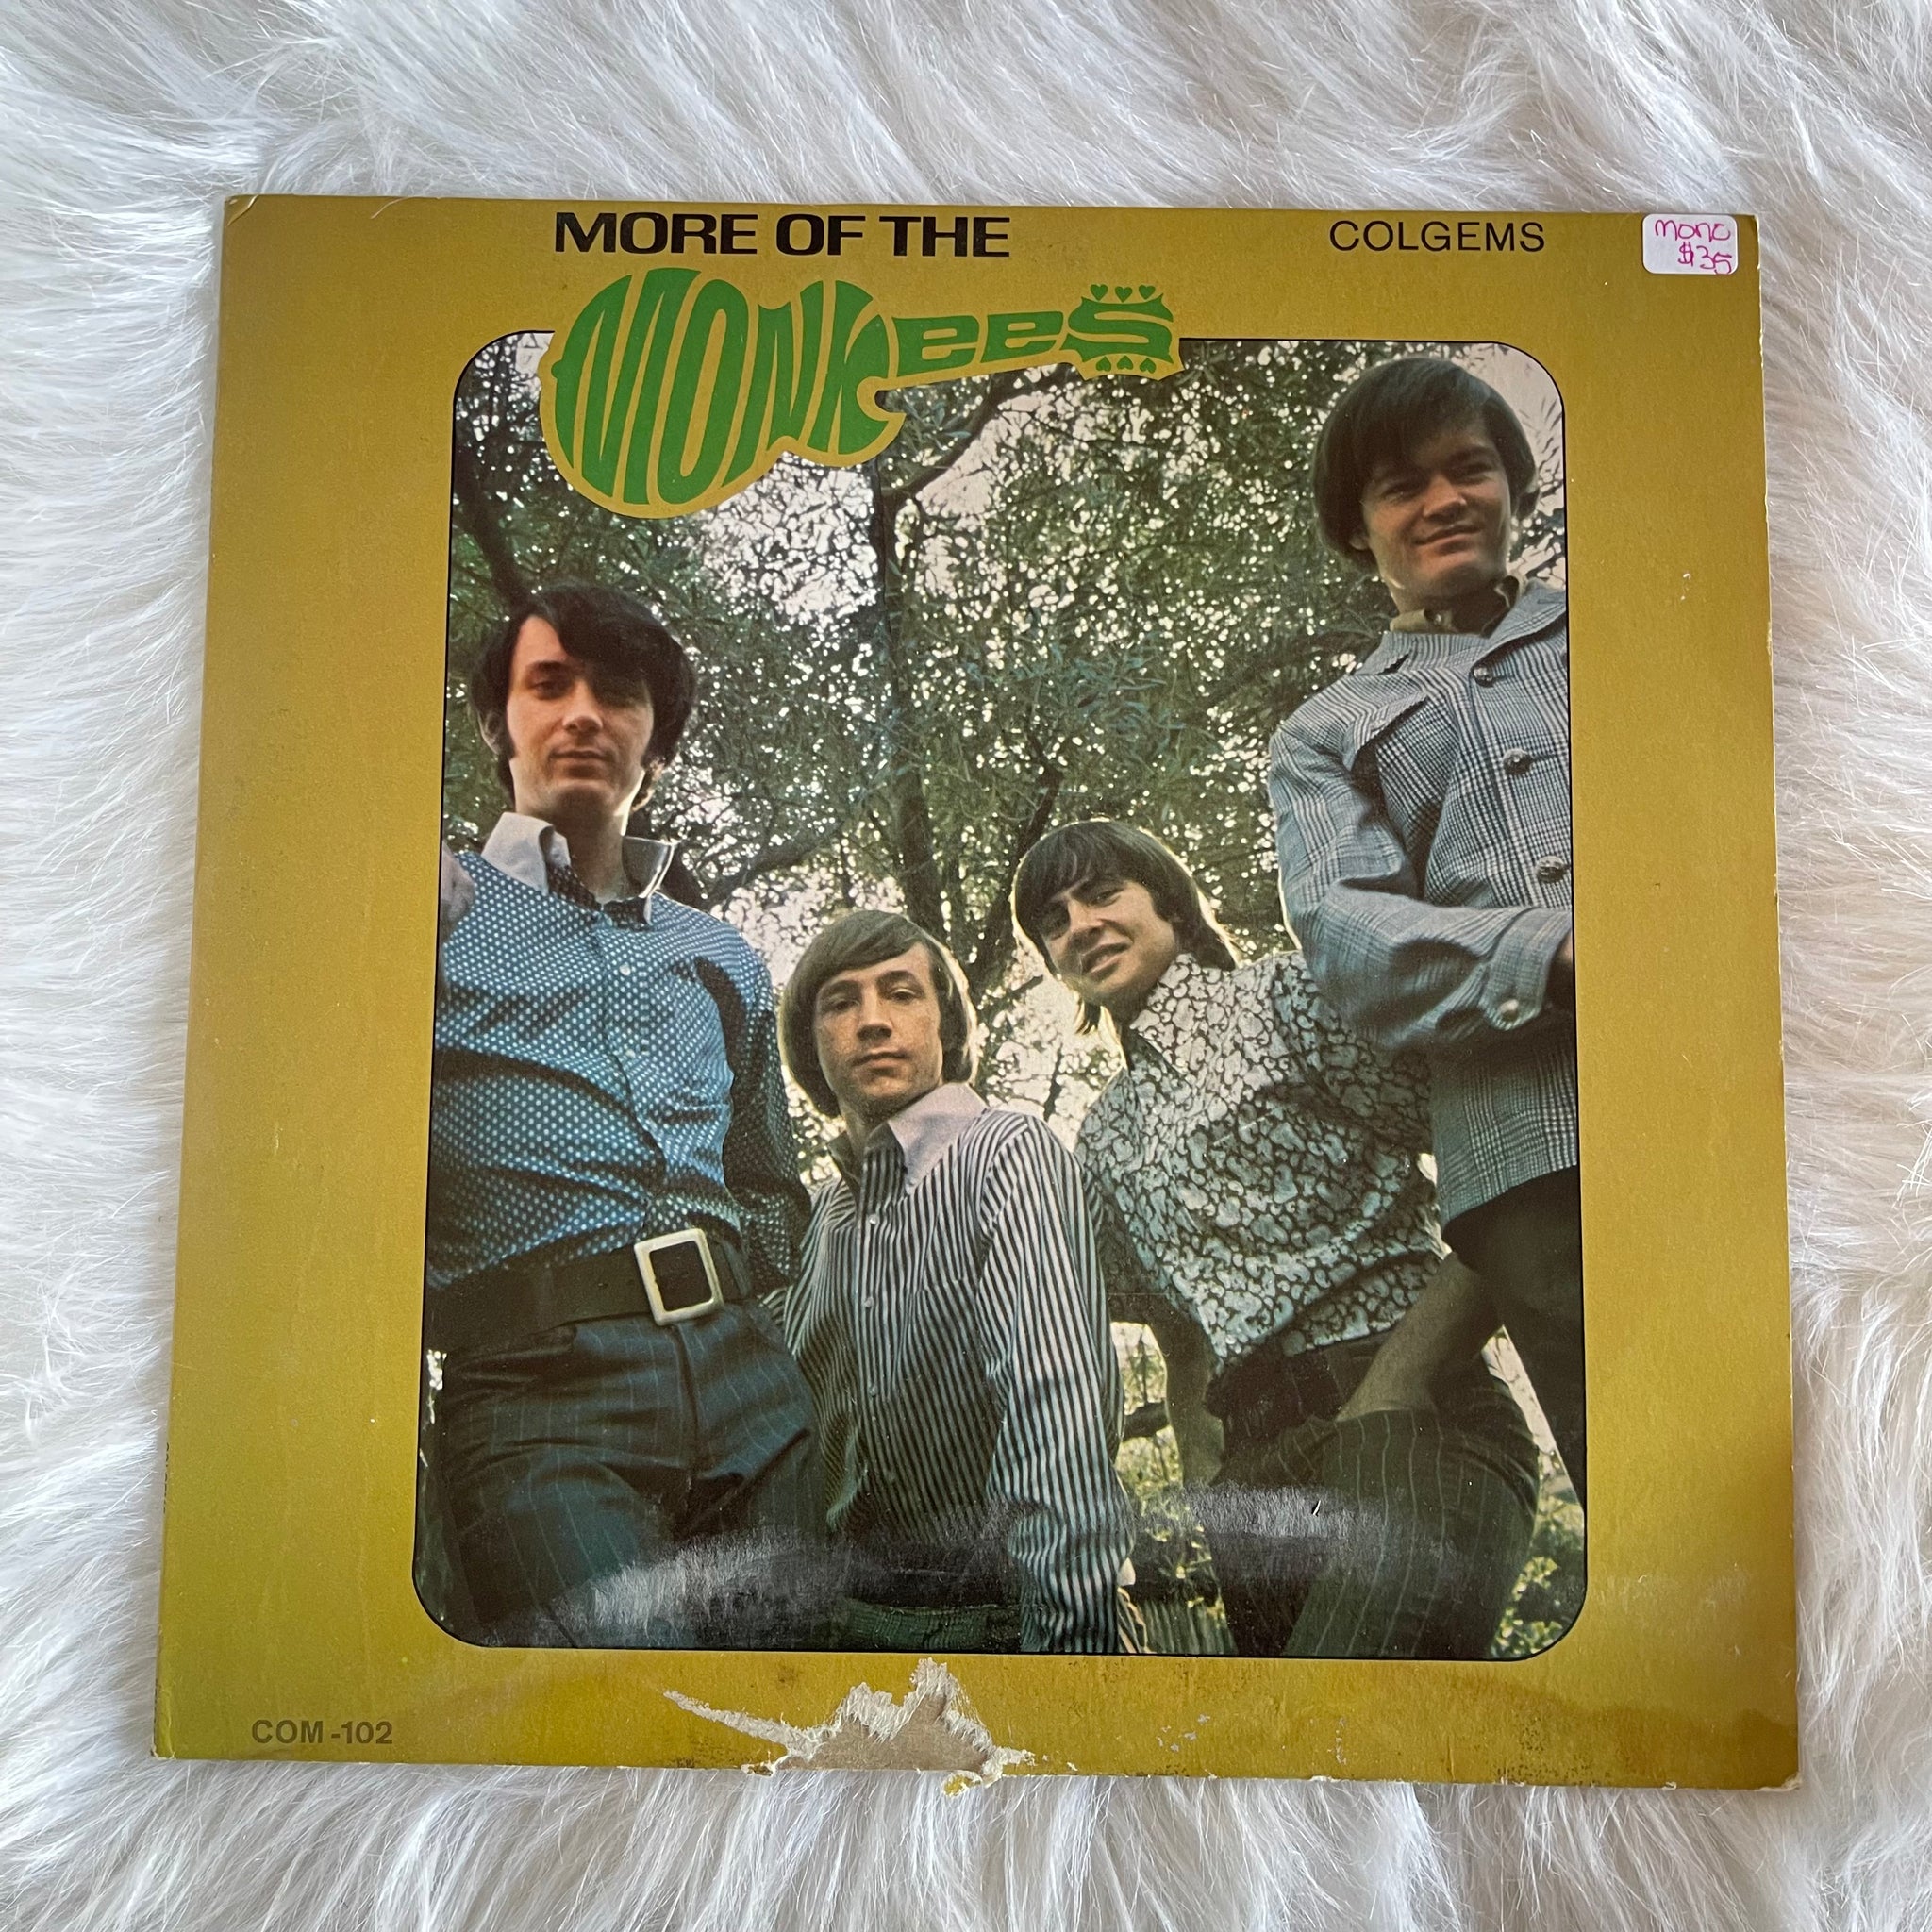 Monkees,The-More of the Monkees MONO